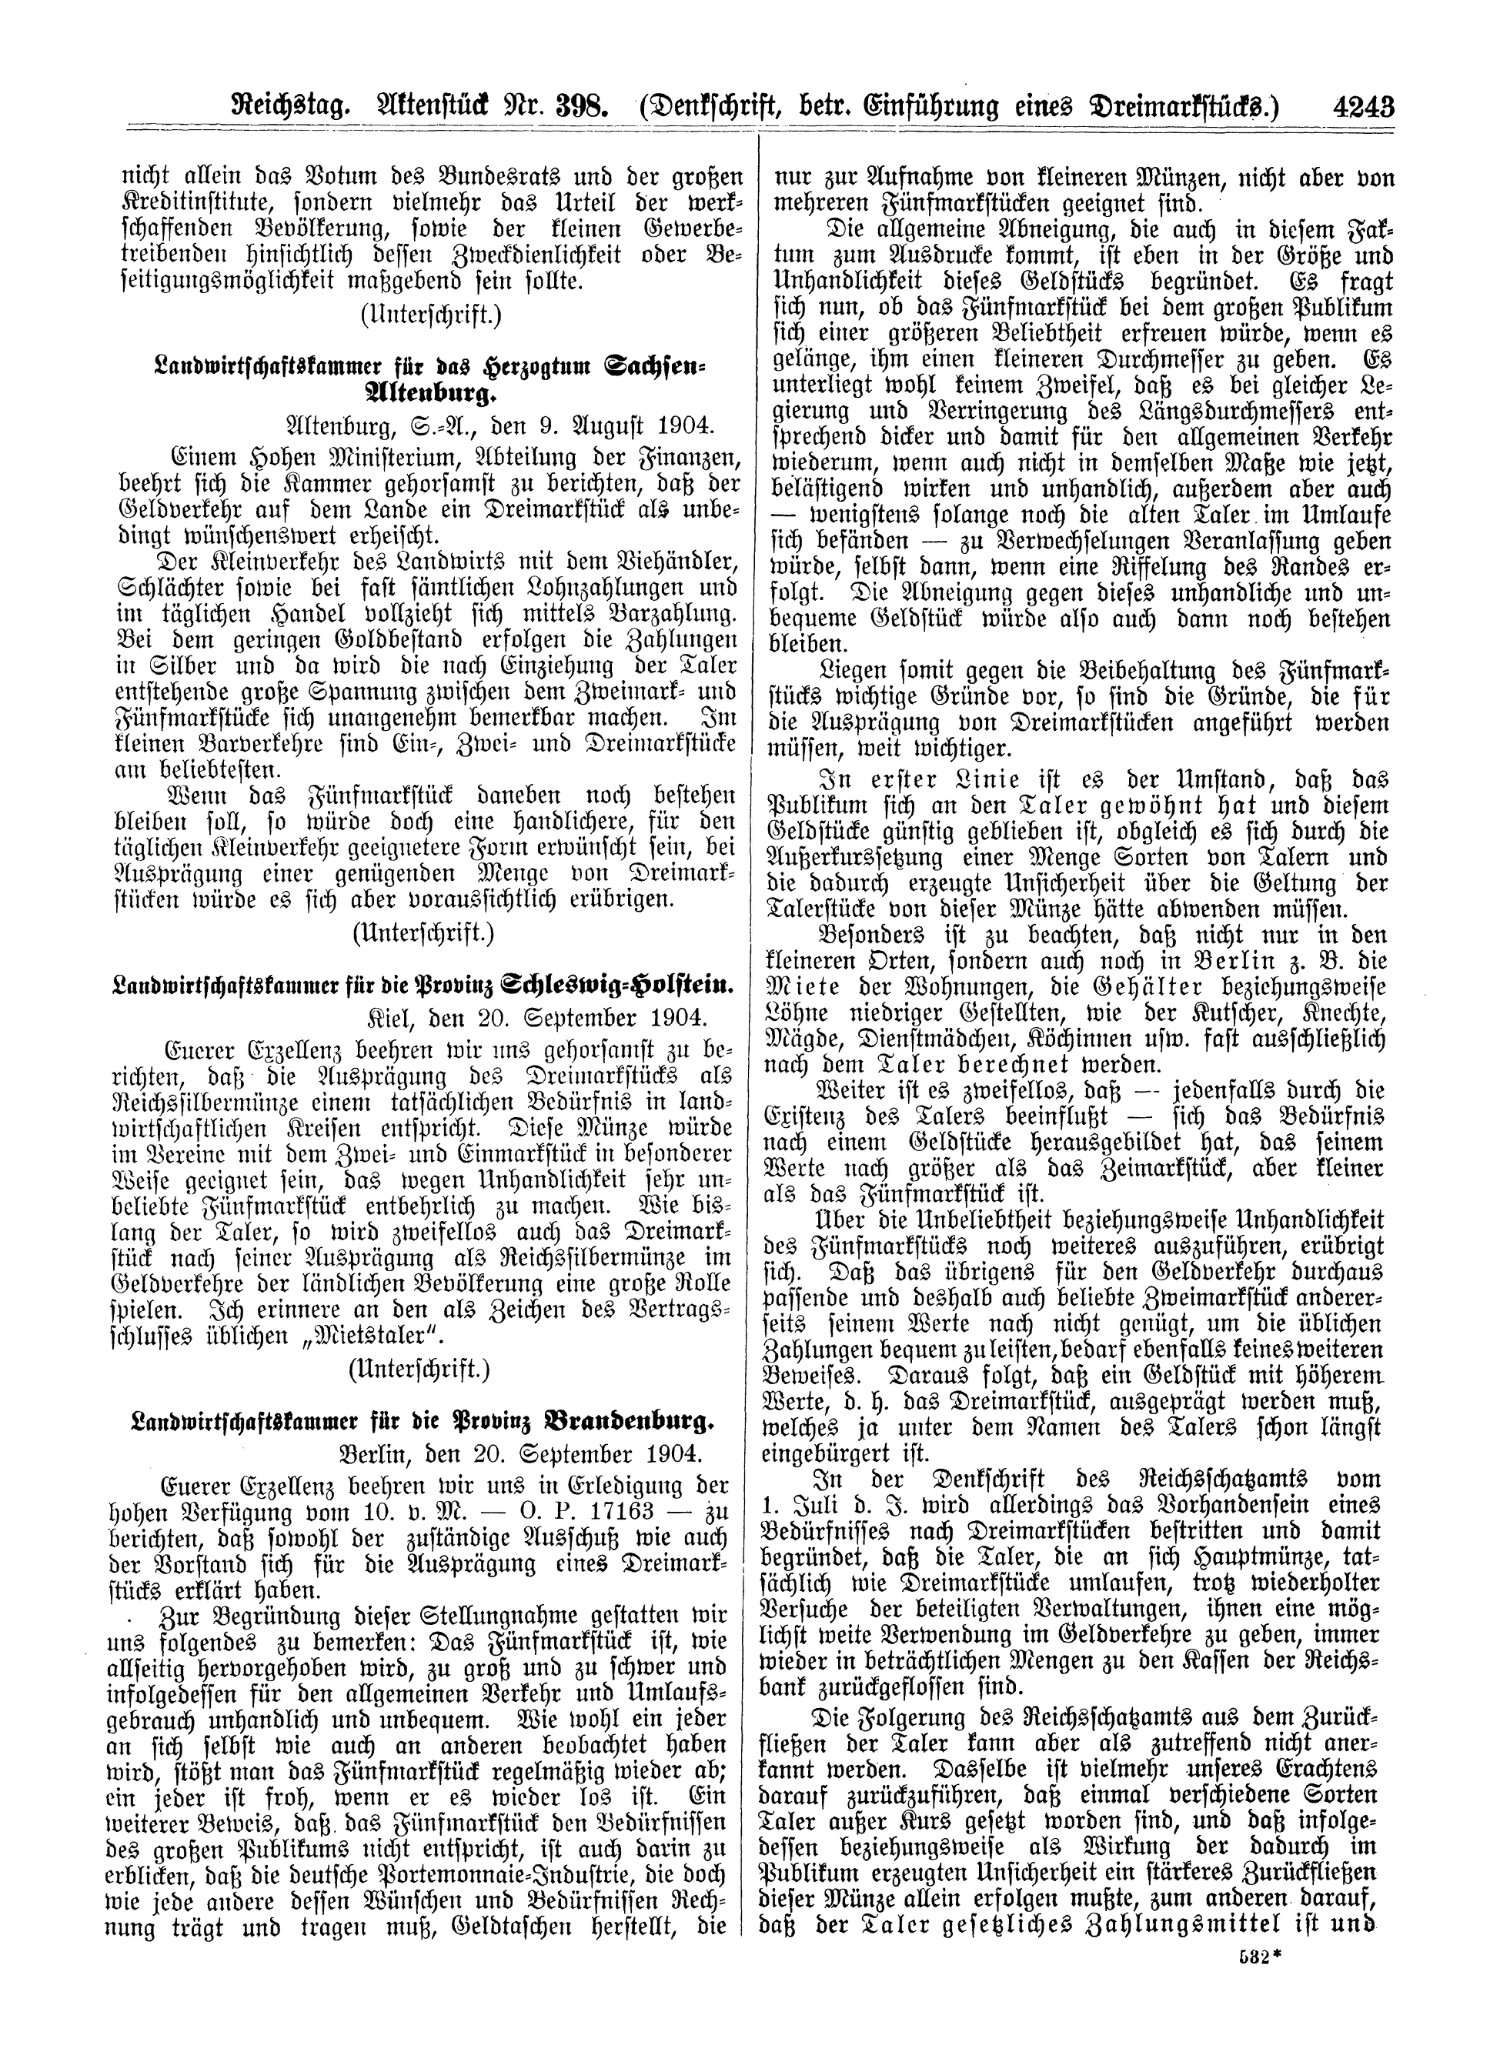 Scan of page 4243